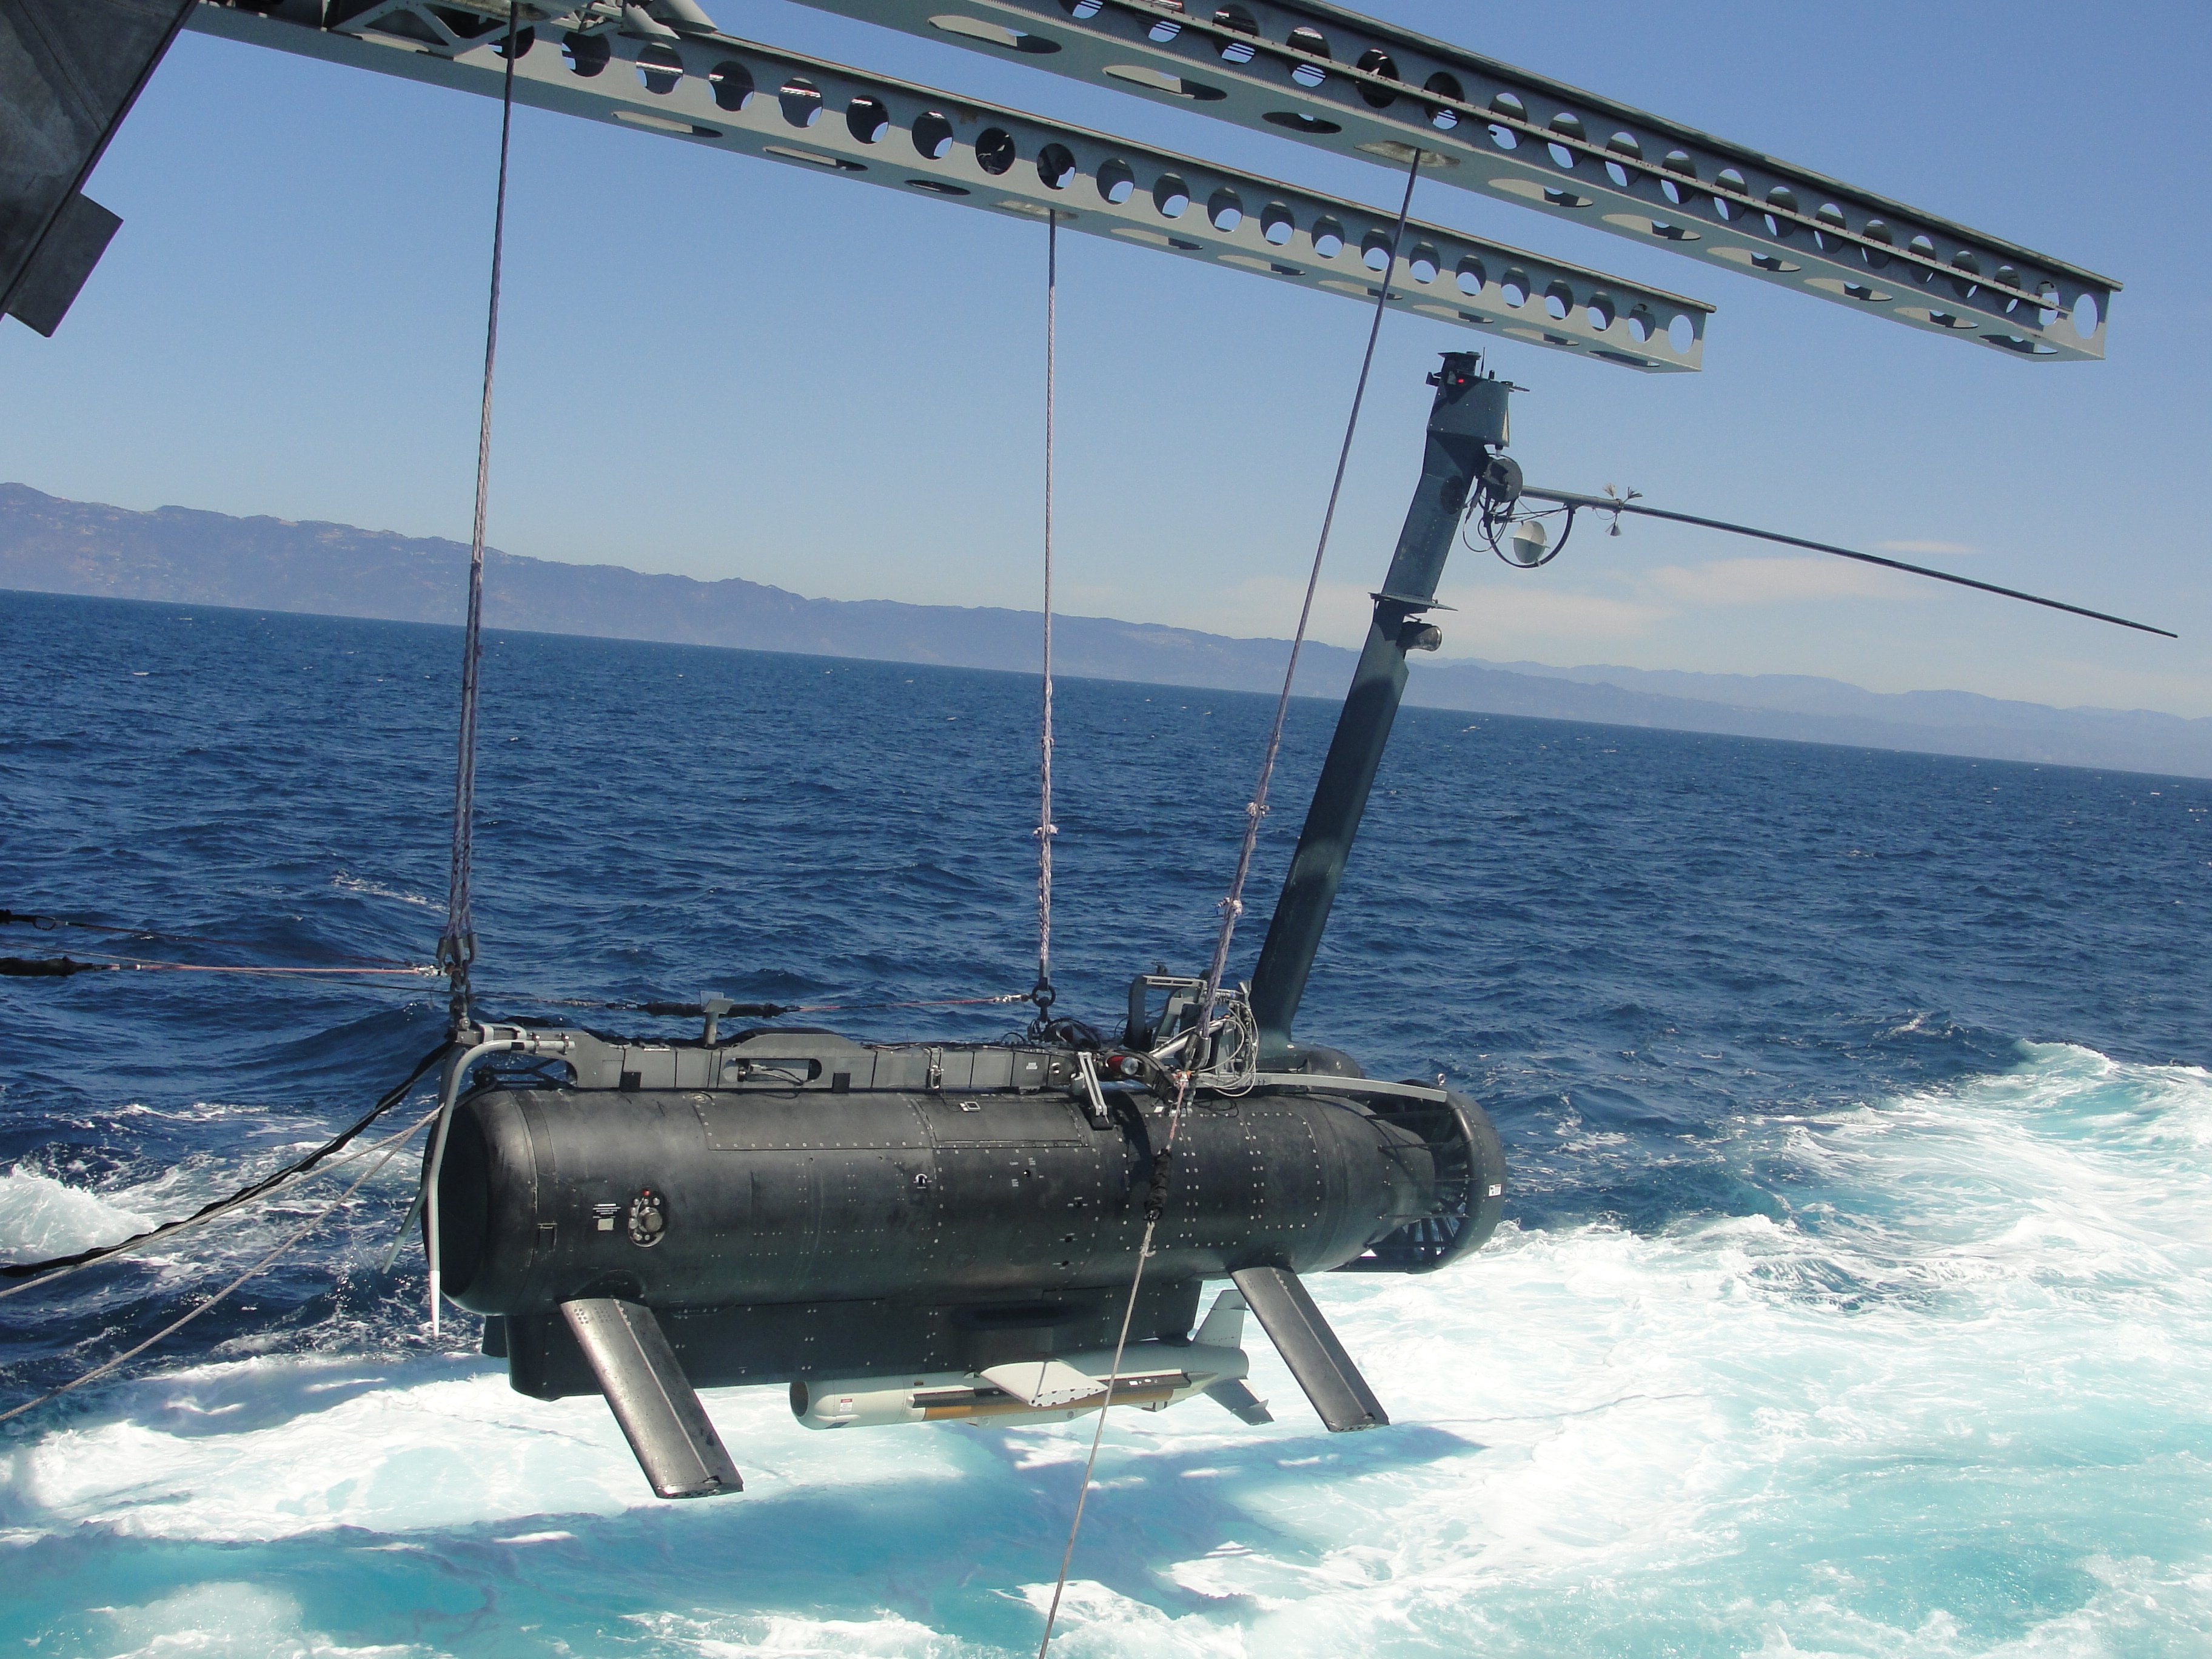 The littoral combat ship USS Independence (LCS-2) deploys a remote multi-mission vehicle (RMMV) while testing the ship's mine countermeasures mission package (MCM) off the southern California coast in August 2013. Austal USA Photo